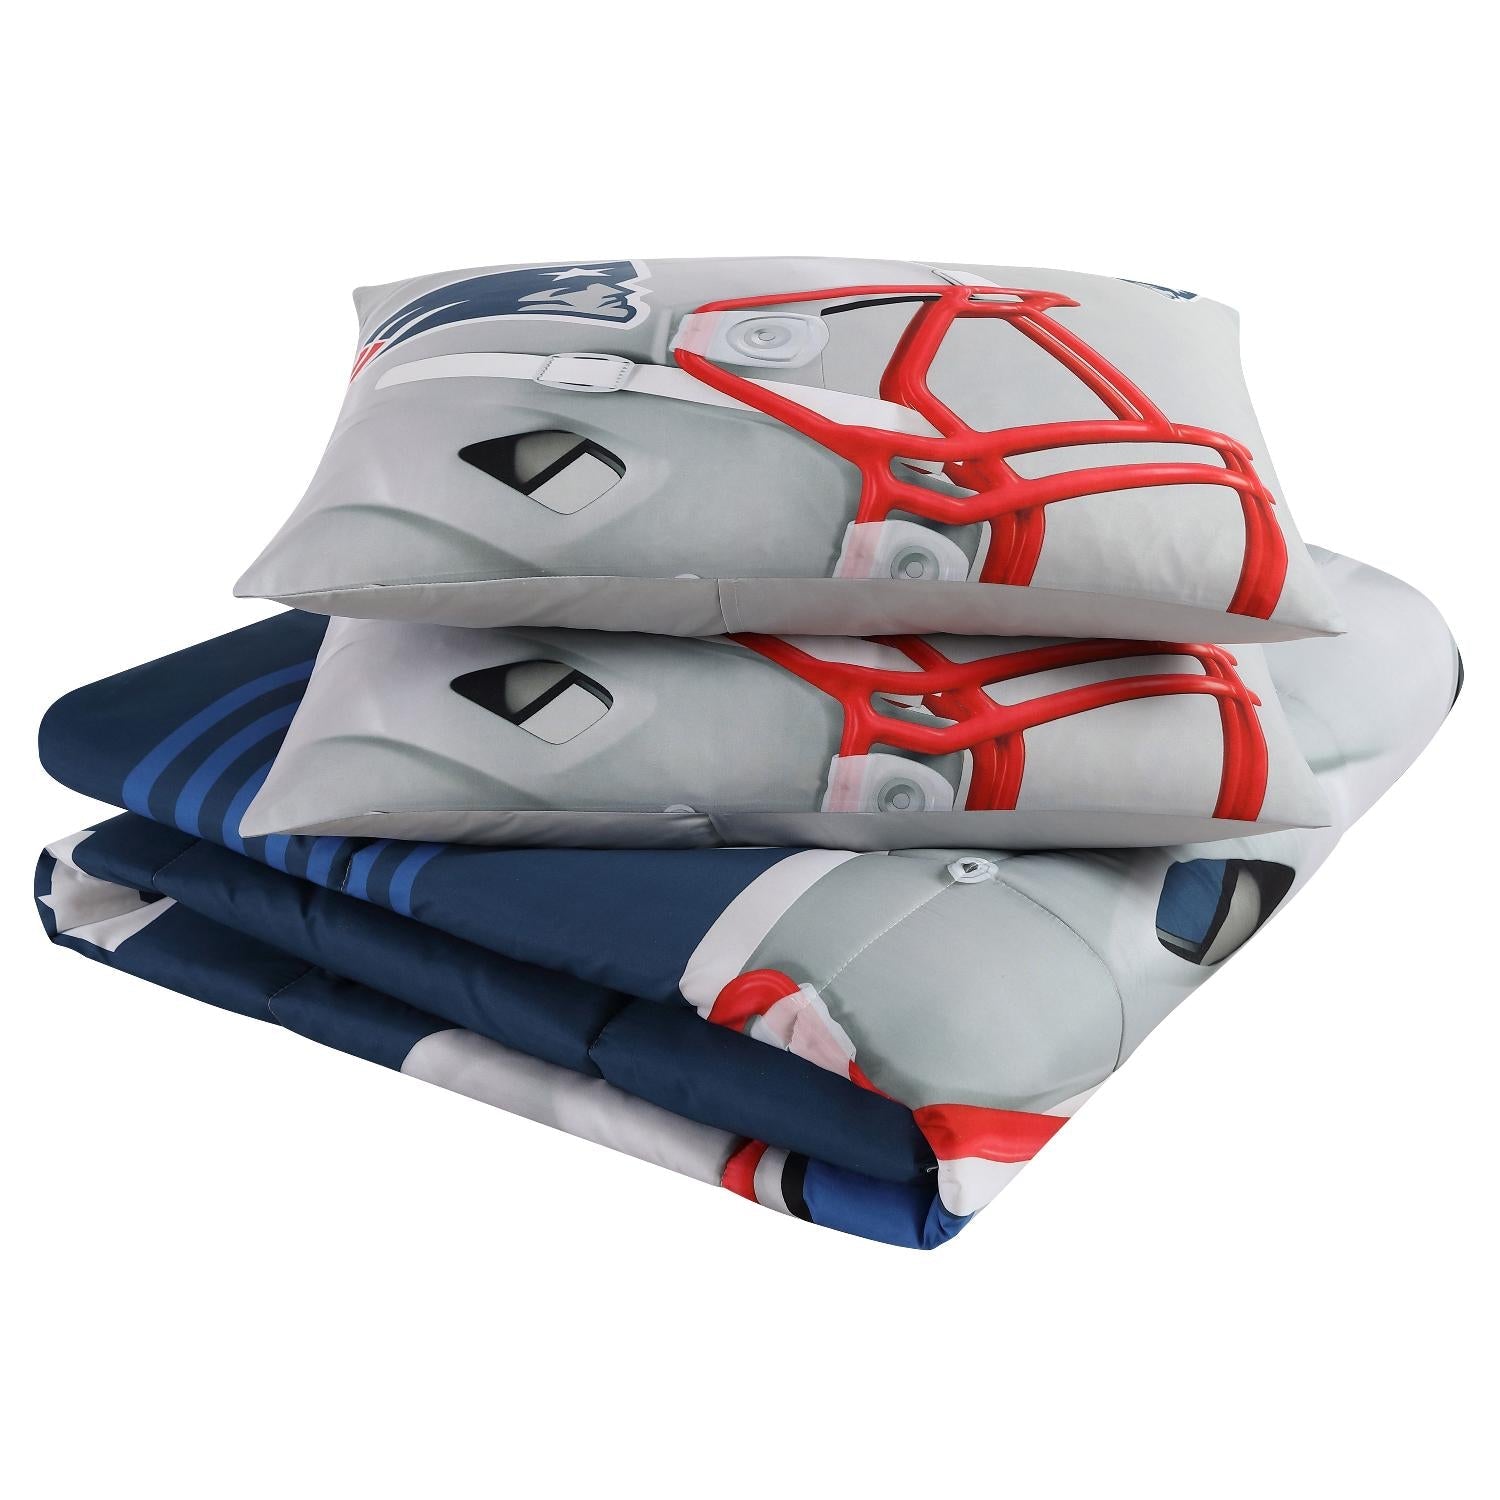 New England Patriots NFL Officially Licensed 3-Piece Comforter Set - Folded